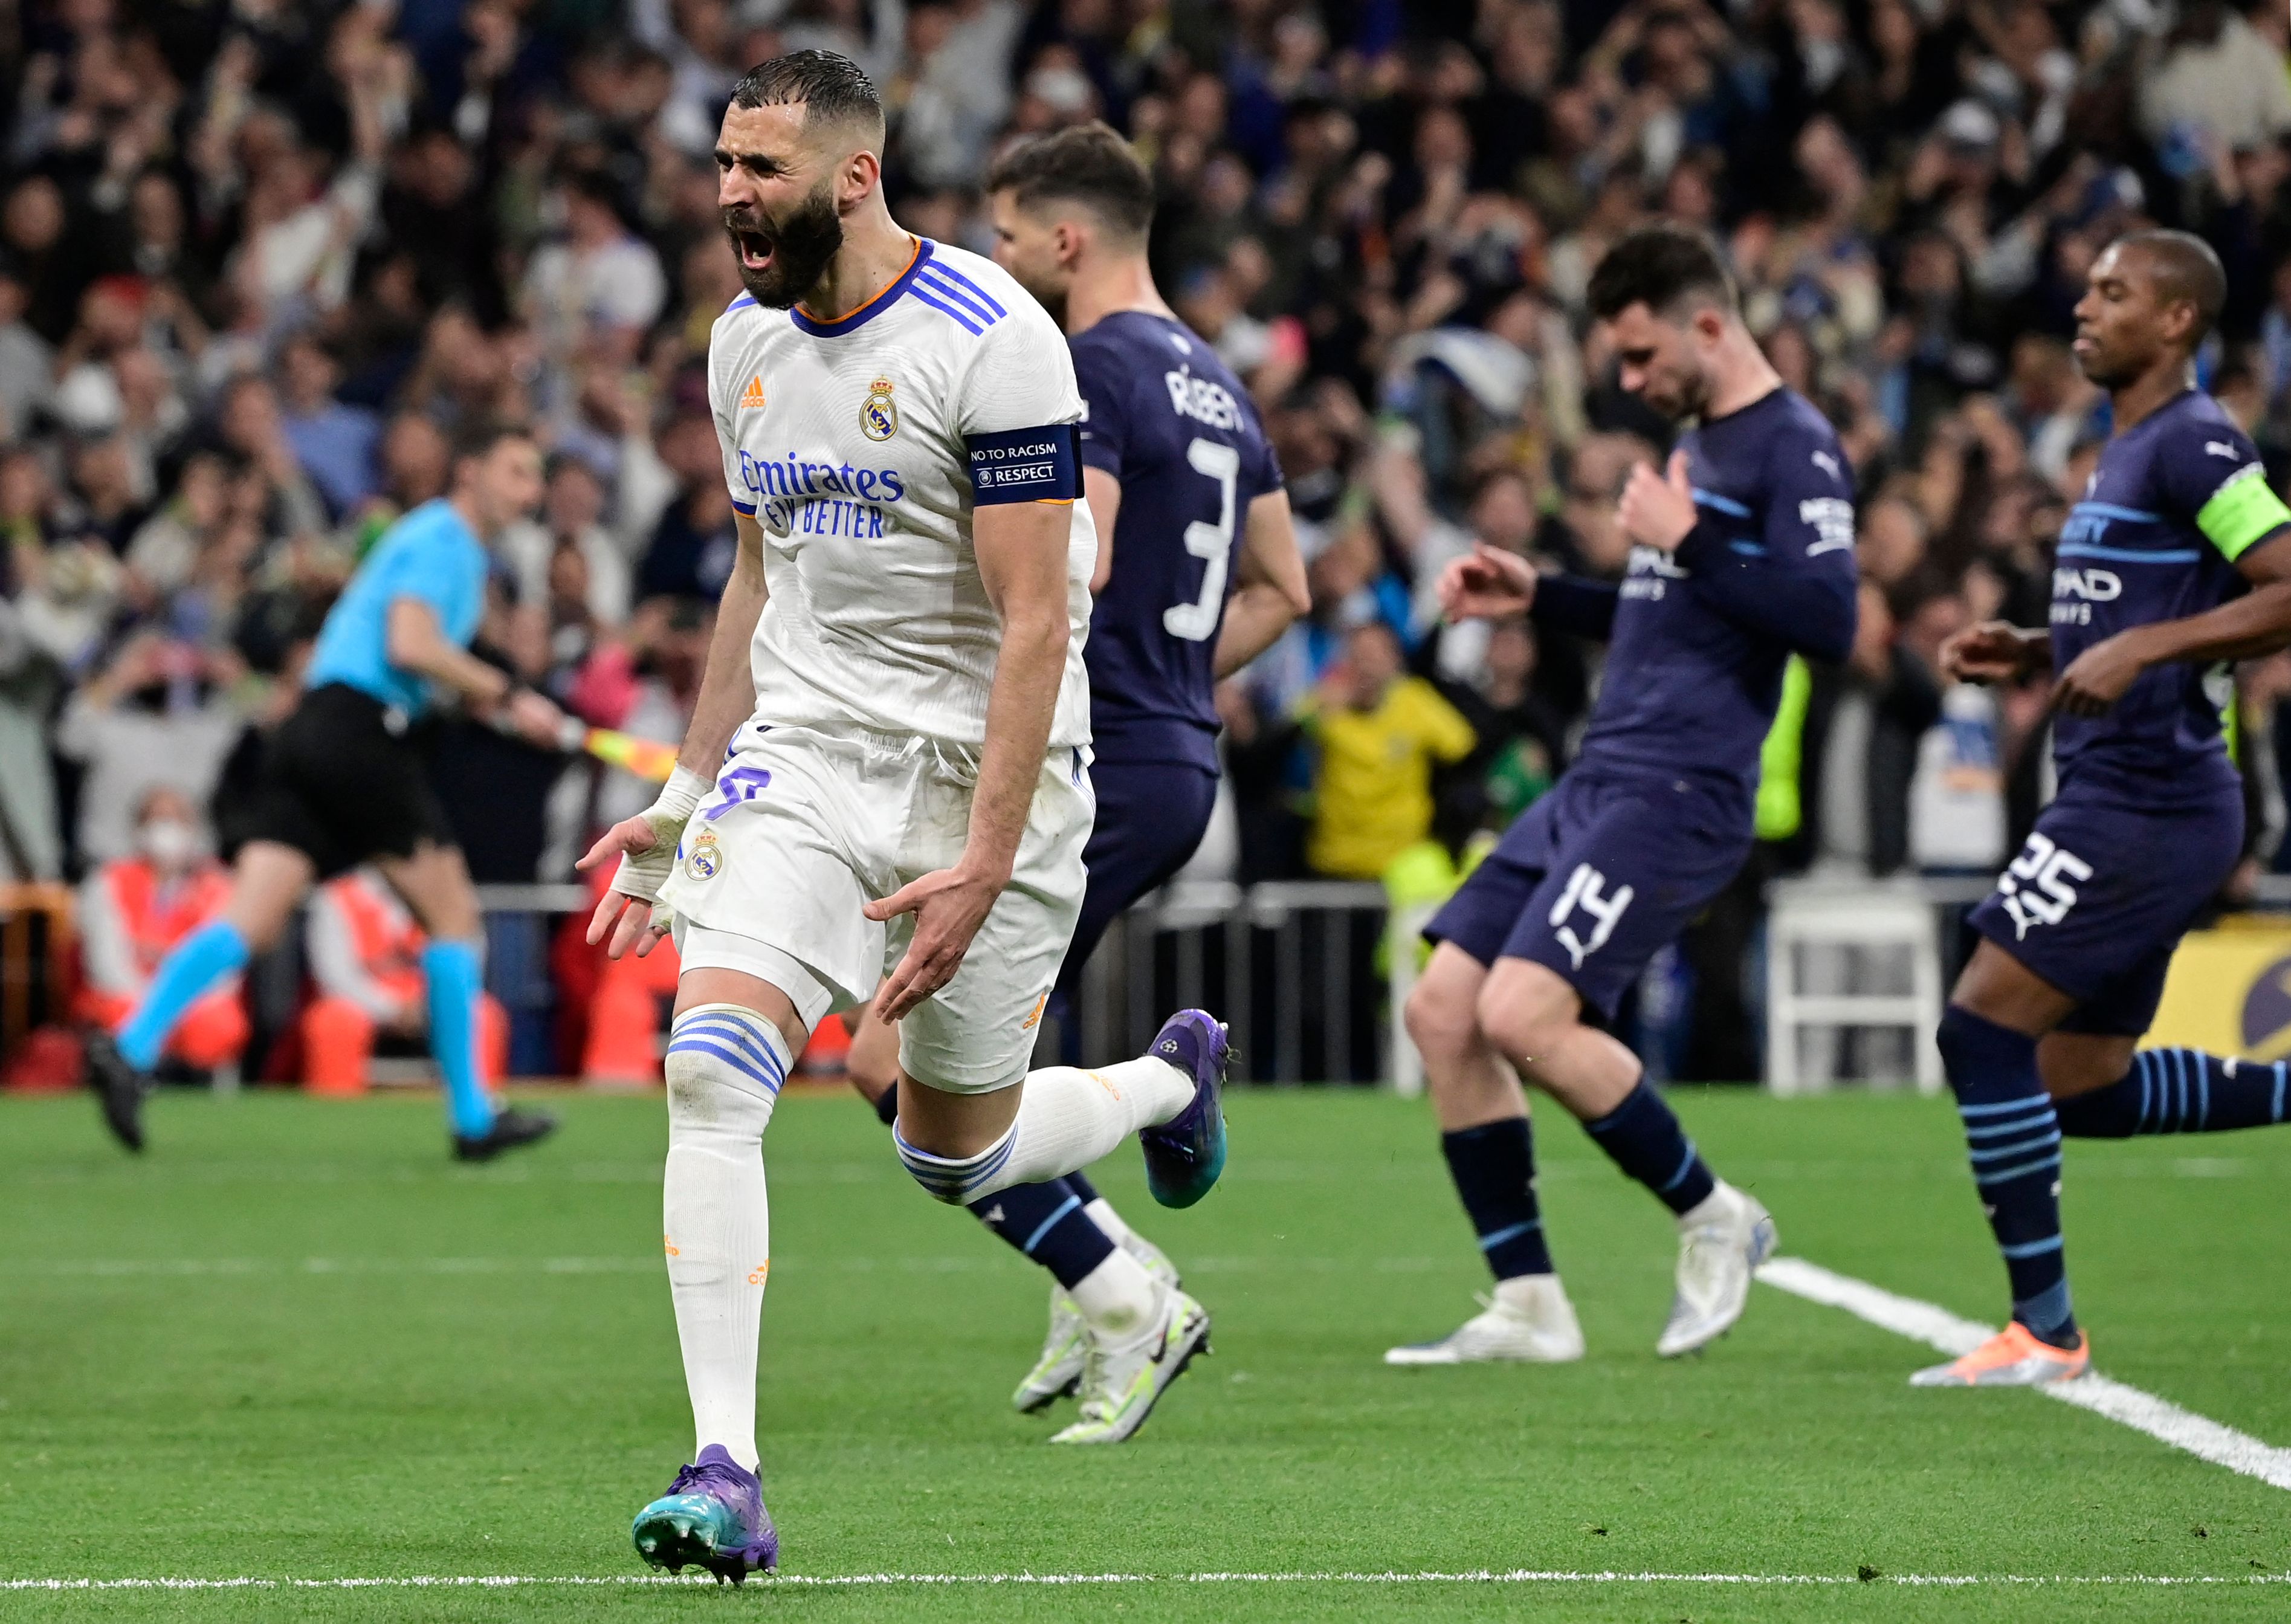 Champions League Semi-Final: COMEBACK KINGS Real Madrid beat Manchester City in EXTRA-TIME to reach UCL FINAL